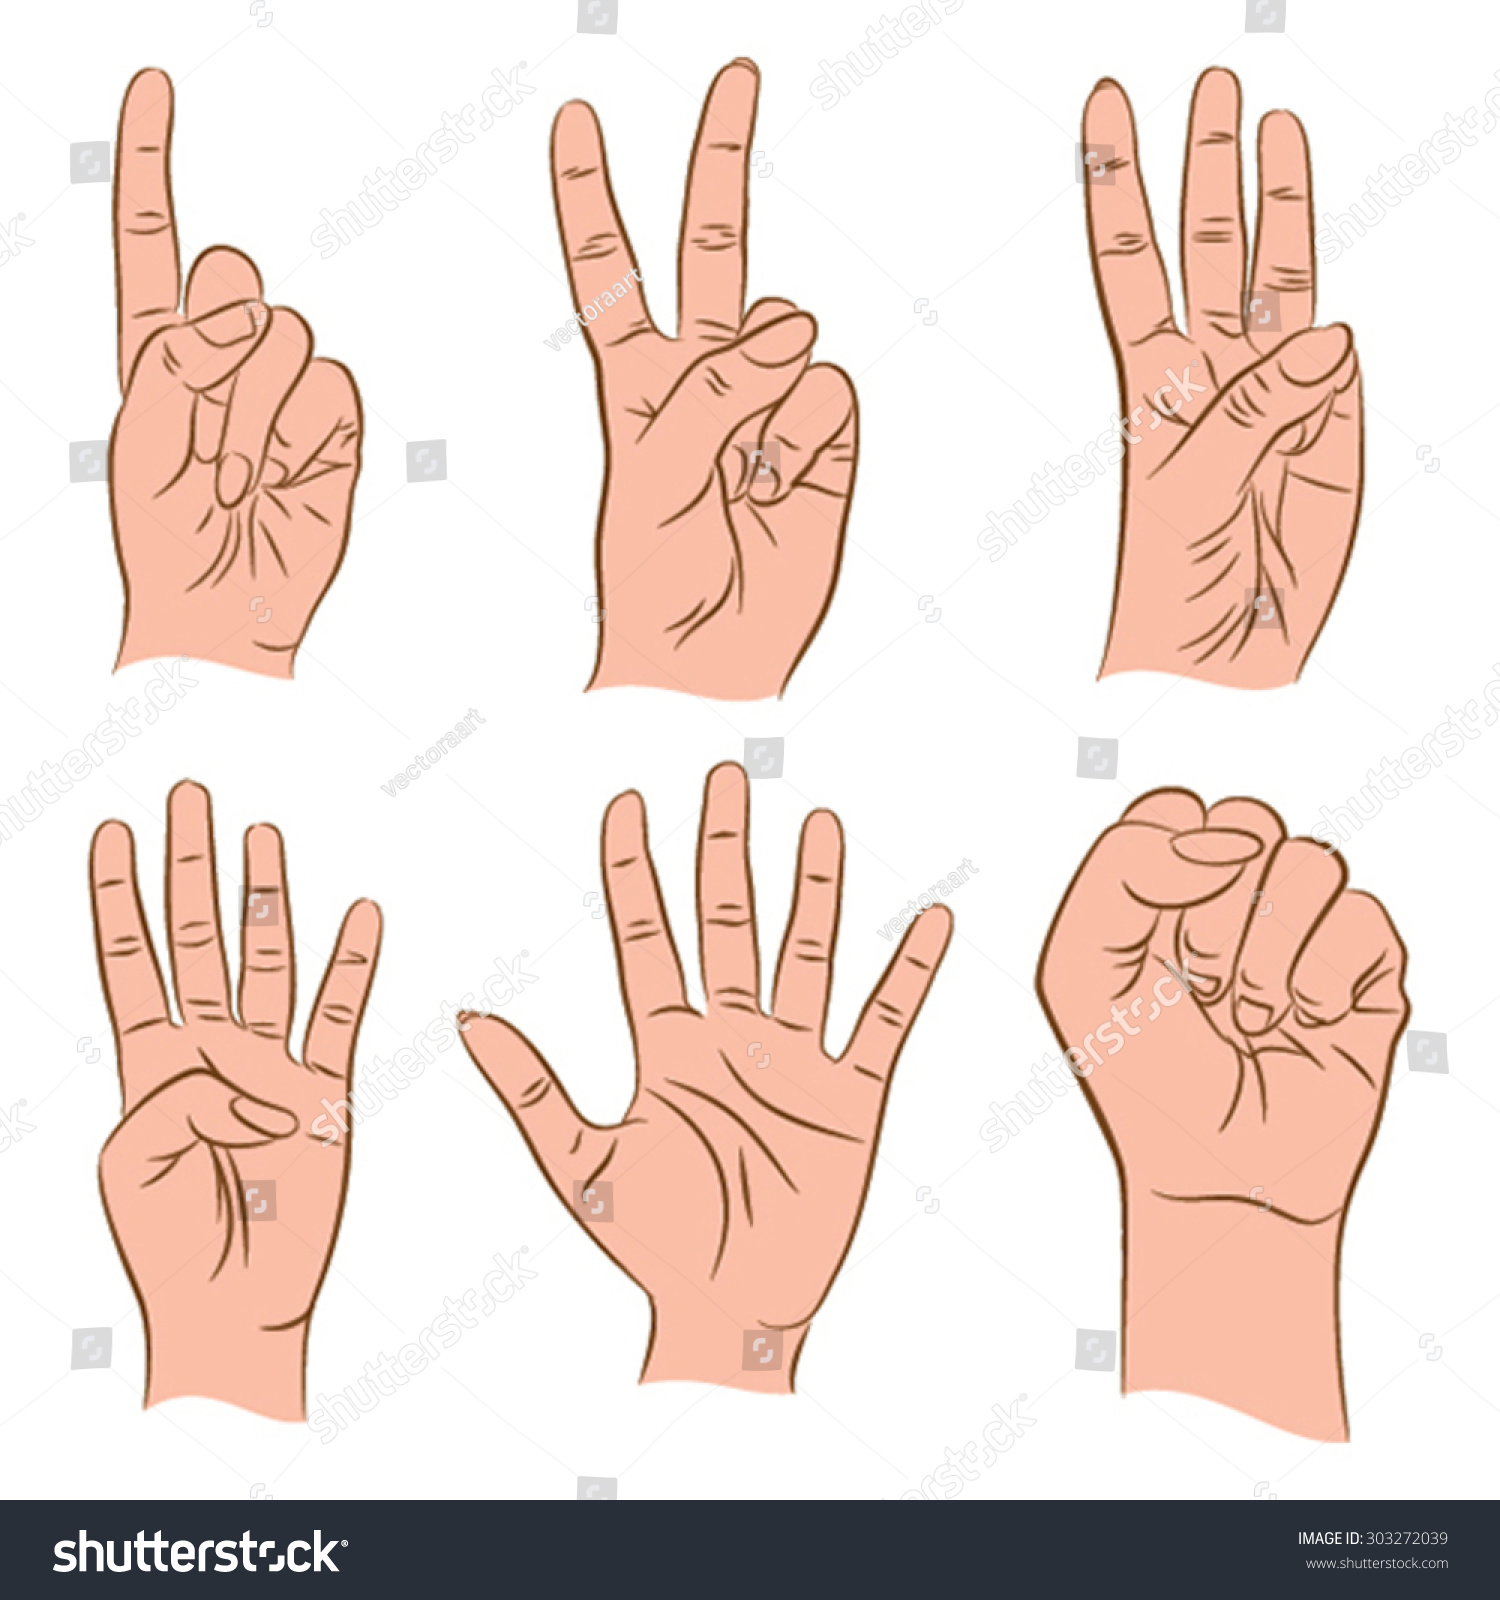 SVG of counting number 1,2,3,4,5,0 by using finger design concept vector svg